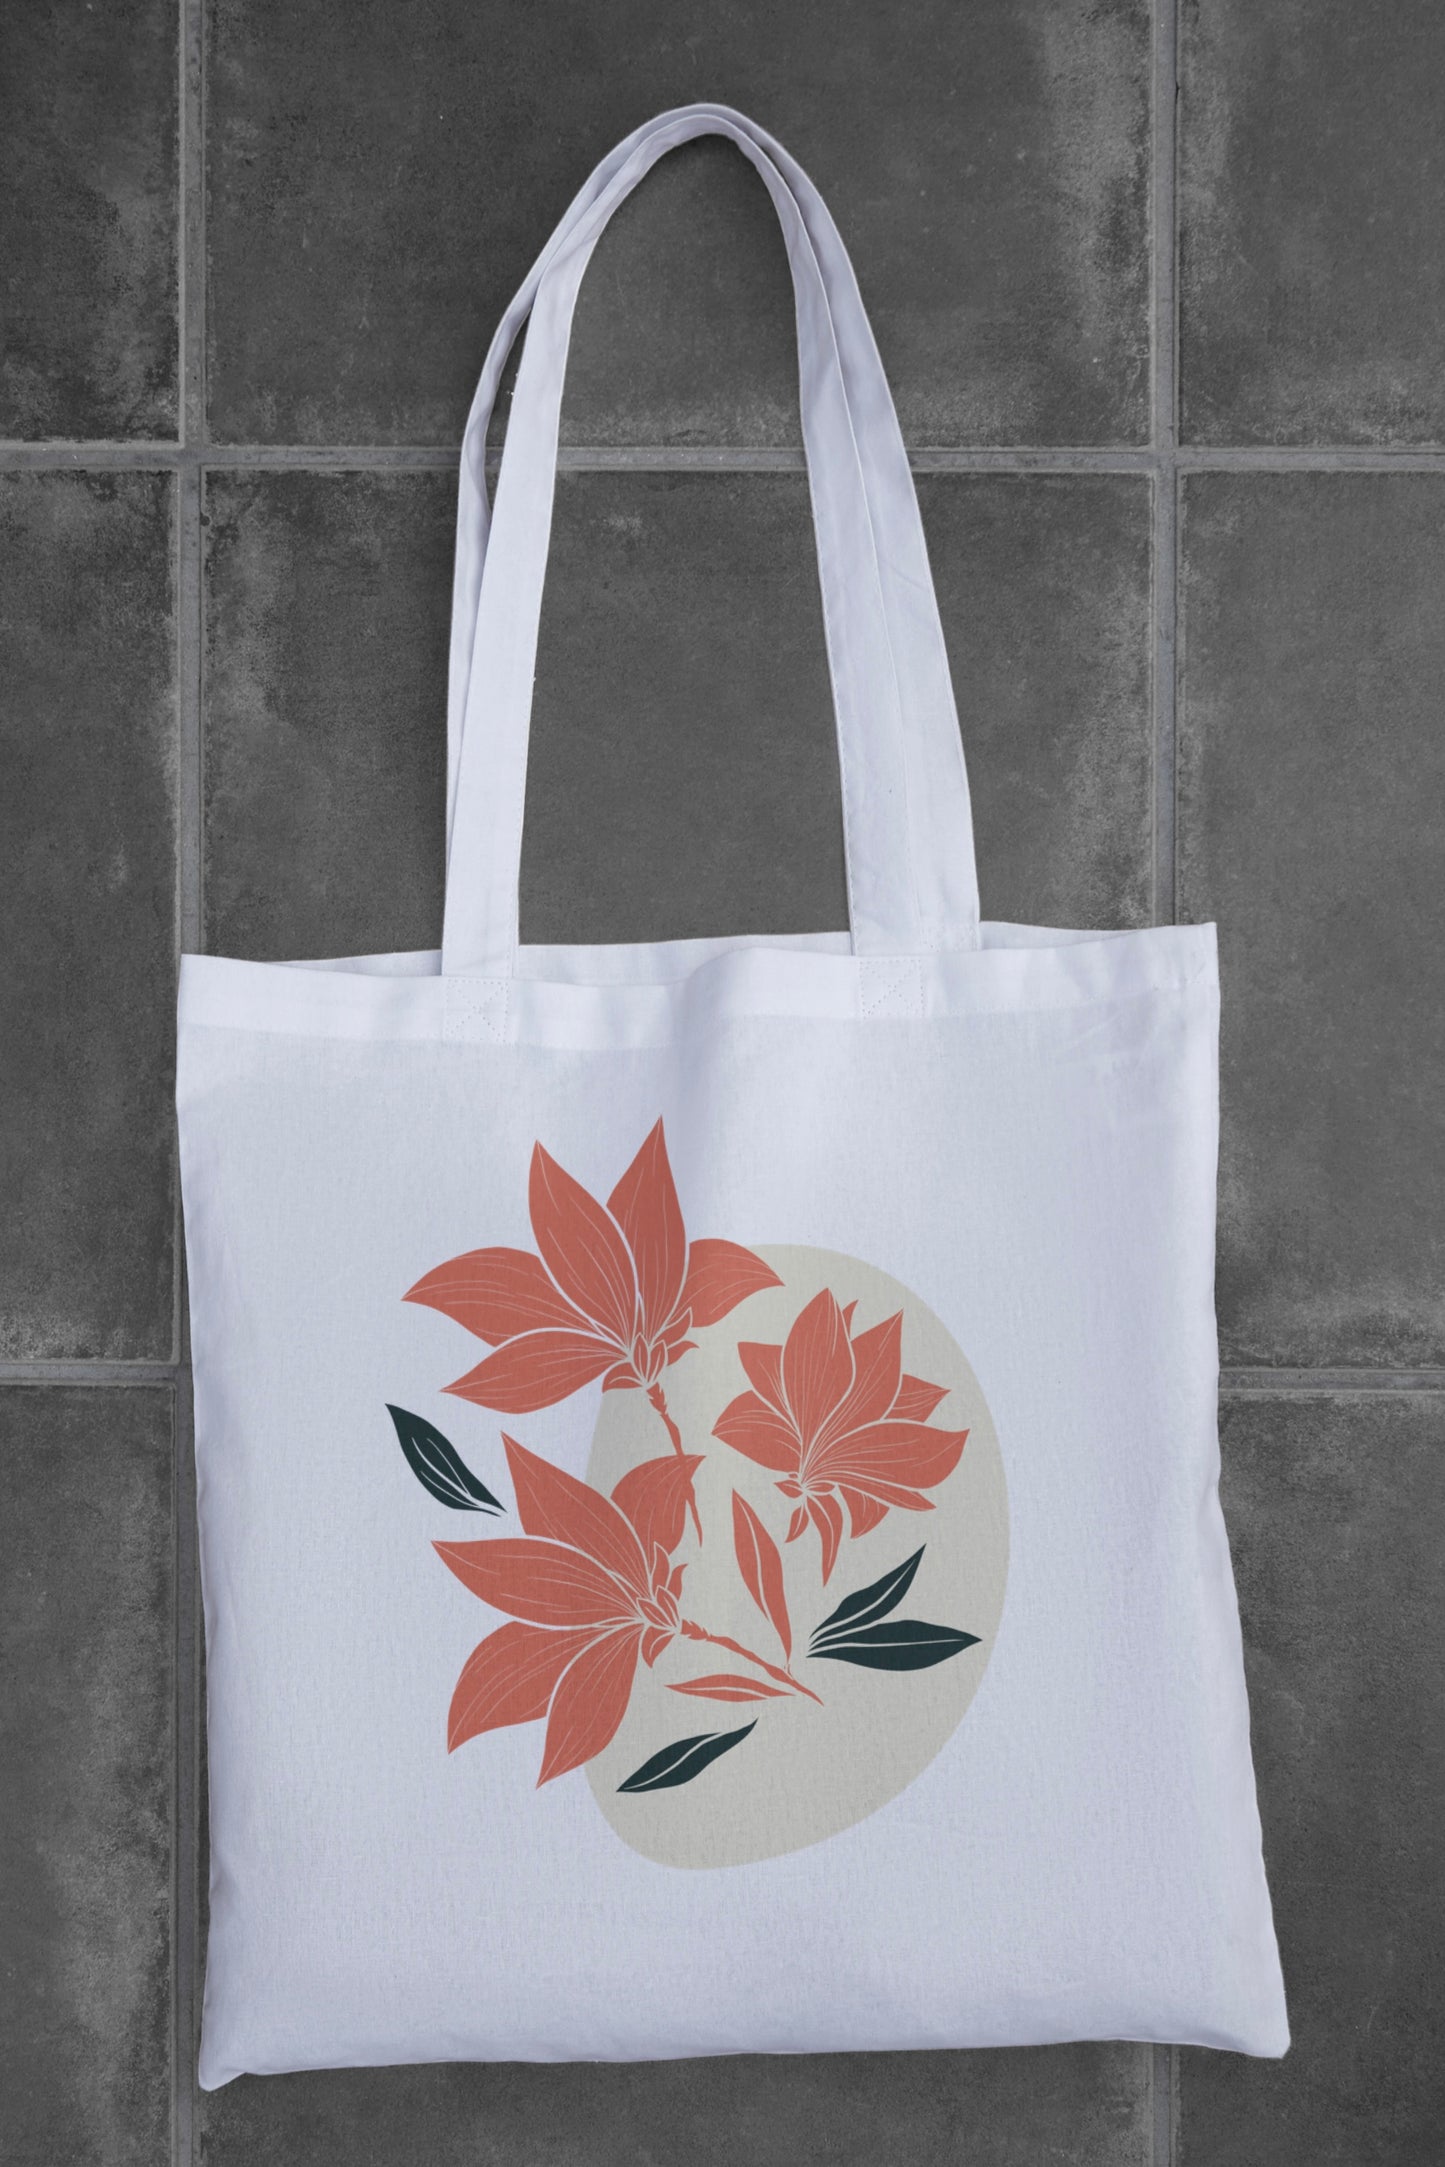 Black/White Aesthetic Flowers Tote Bag with Zipper